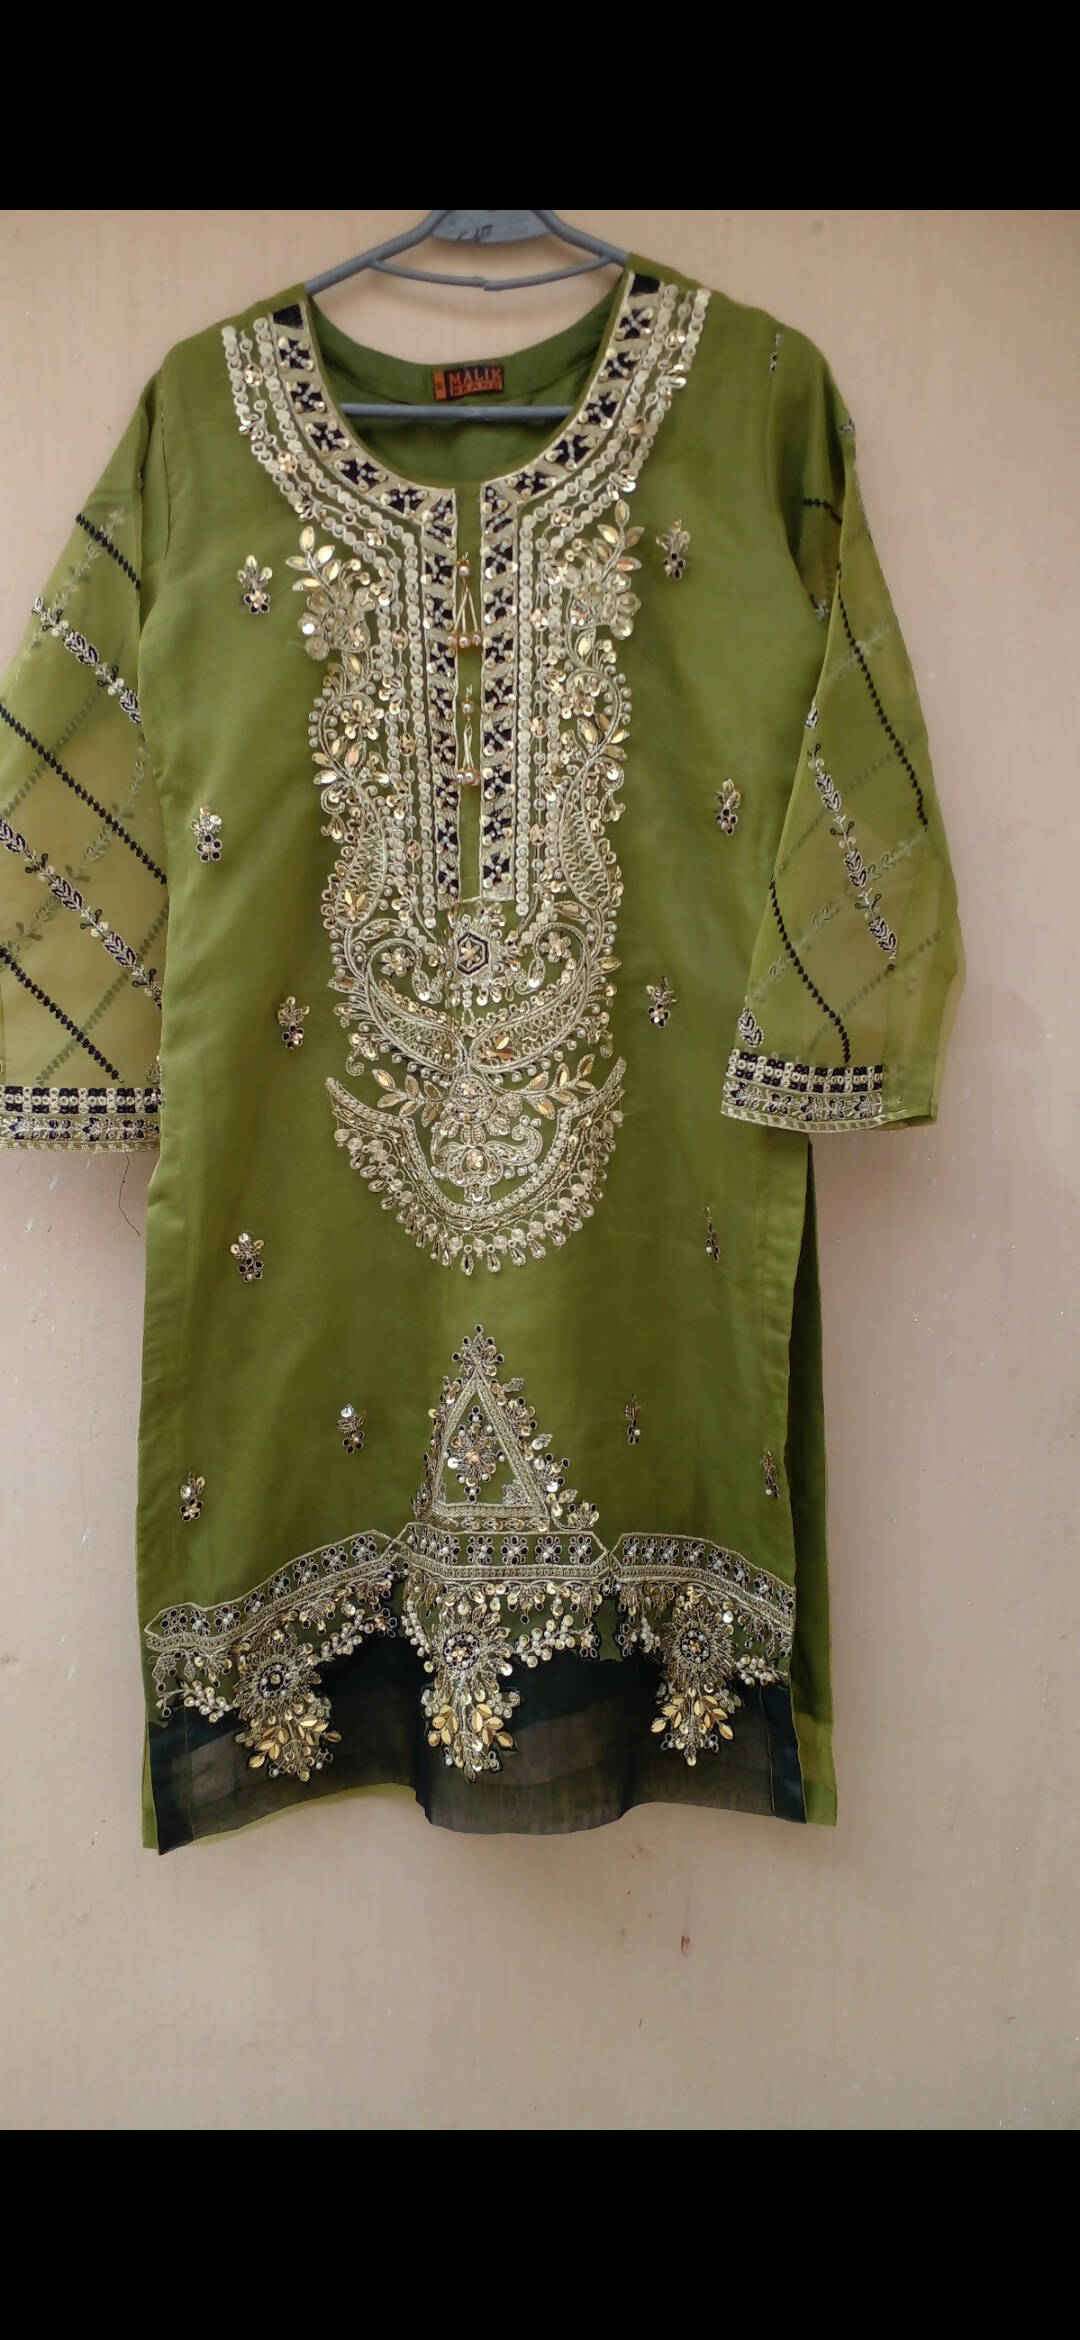 Agha Noor | 3 Piece Green formal Dress (Size: M) | Women Branded Formals | Worn Once